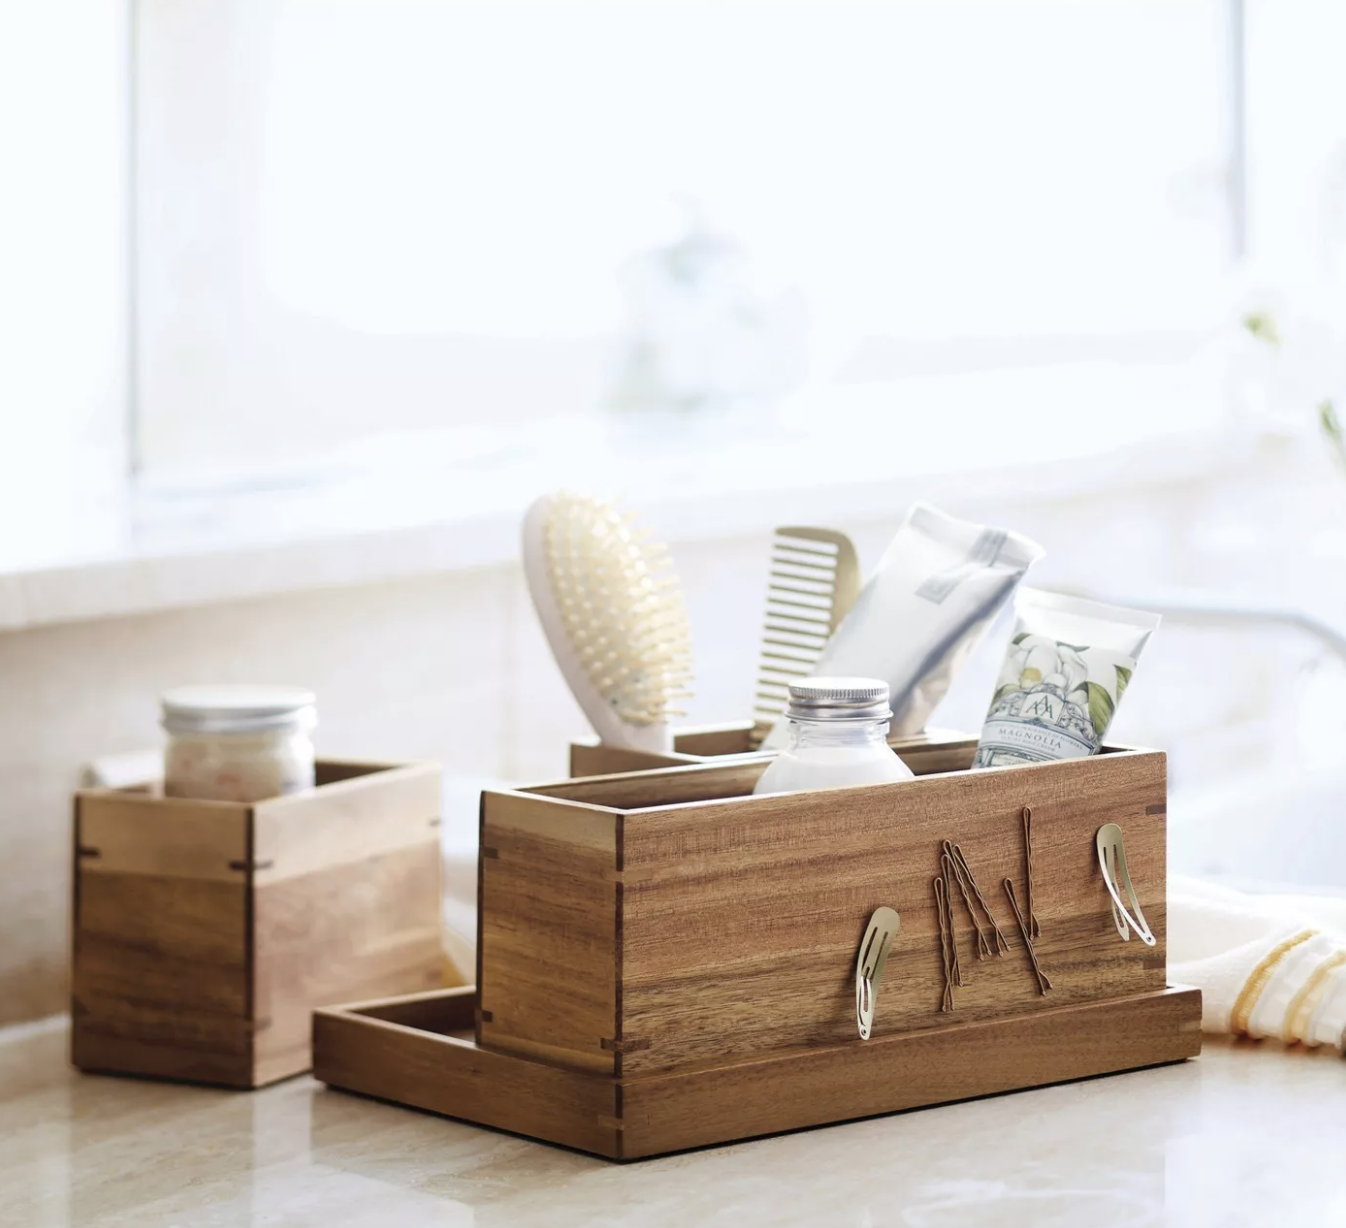 the wooden organizer holding brushes, lotion bottles, and bobby pins